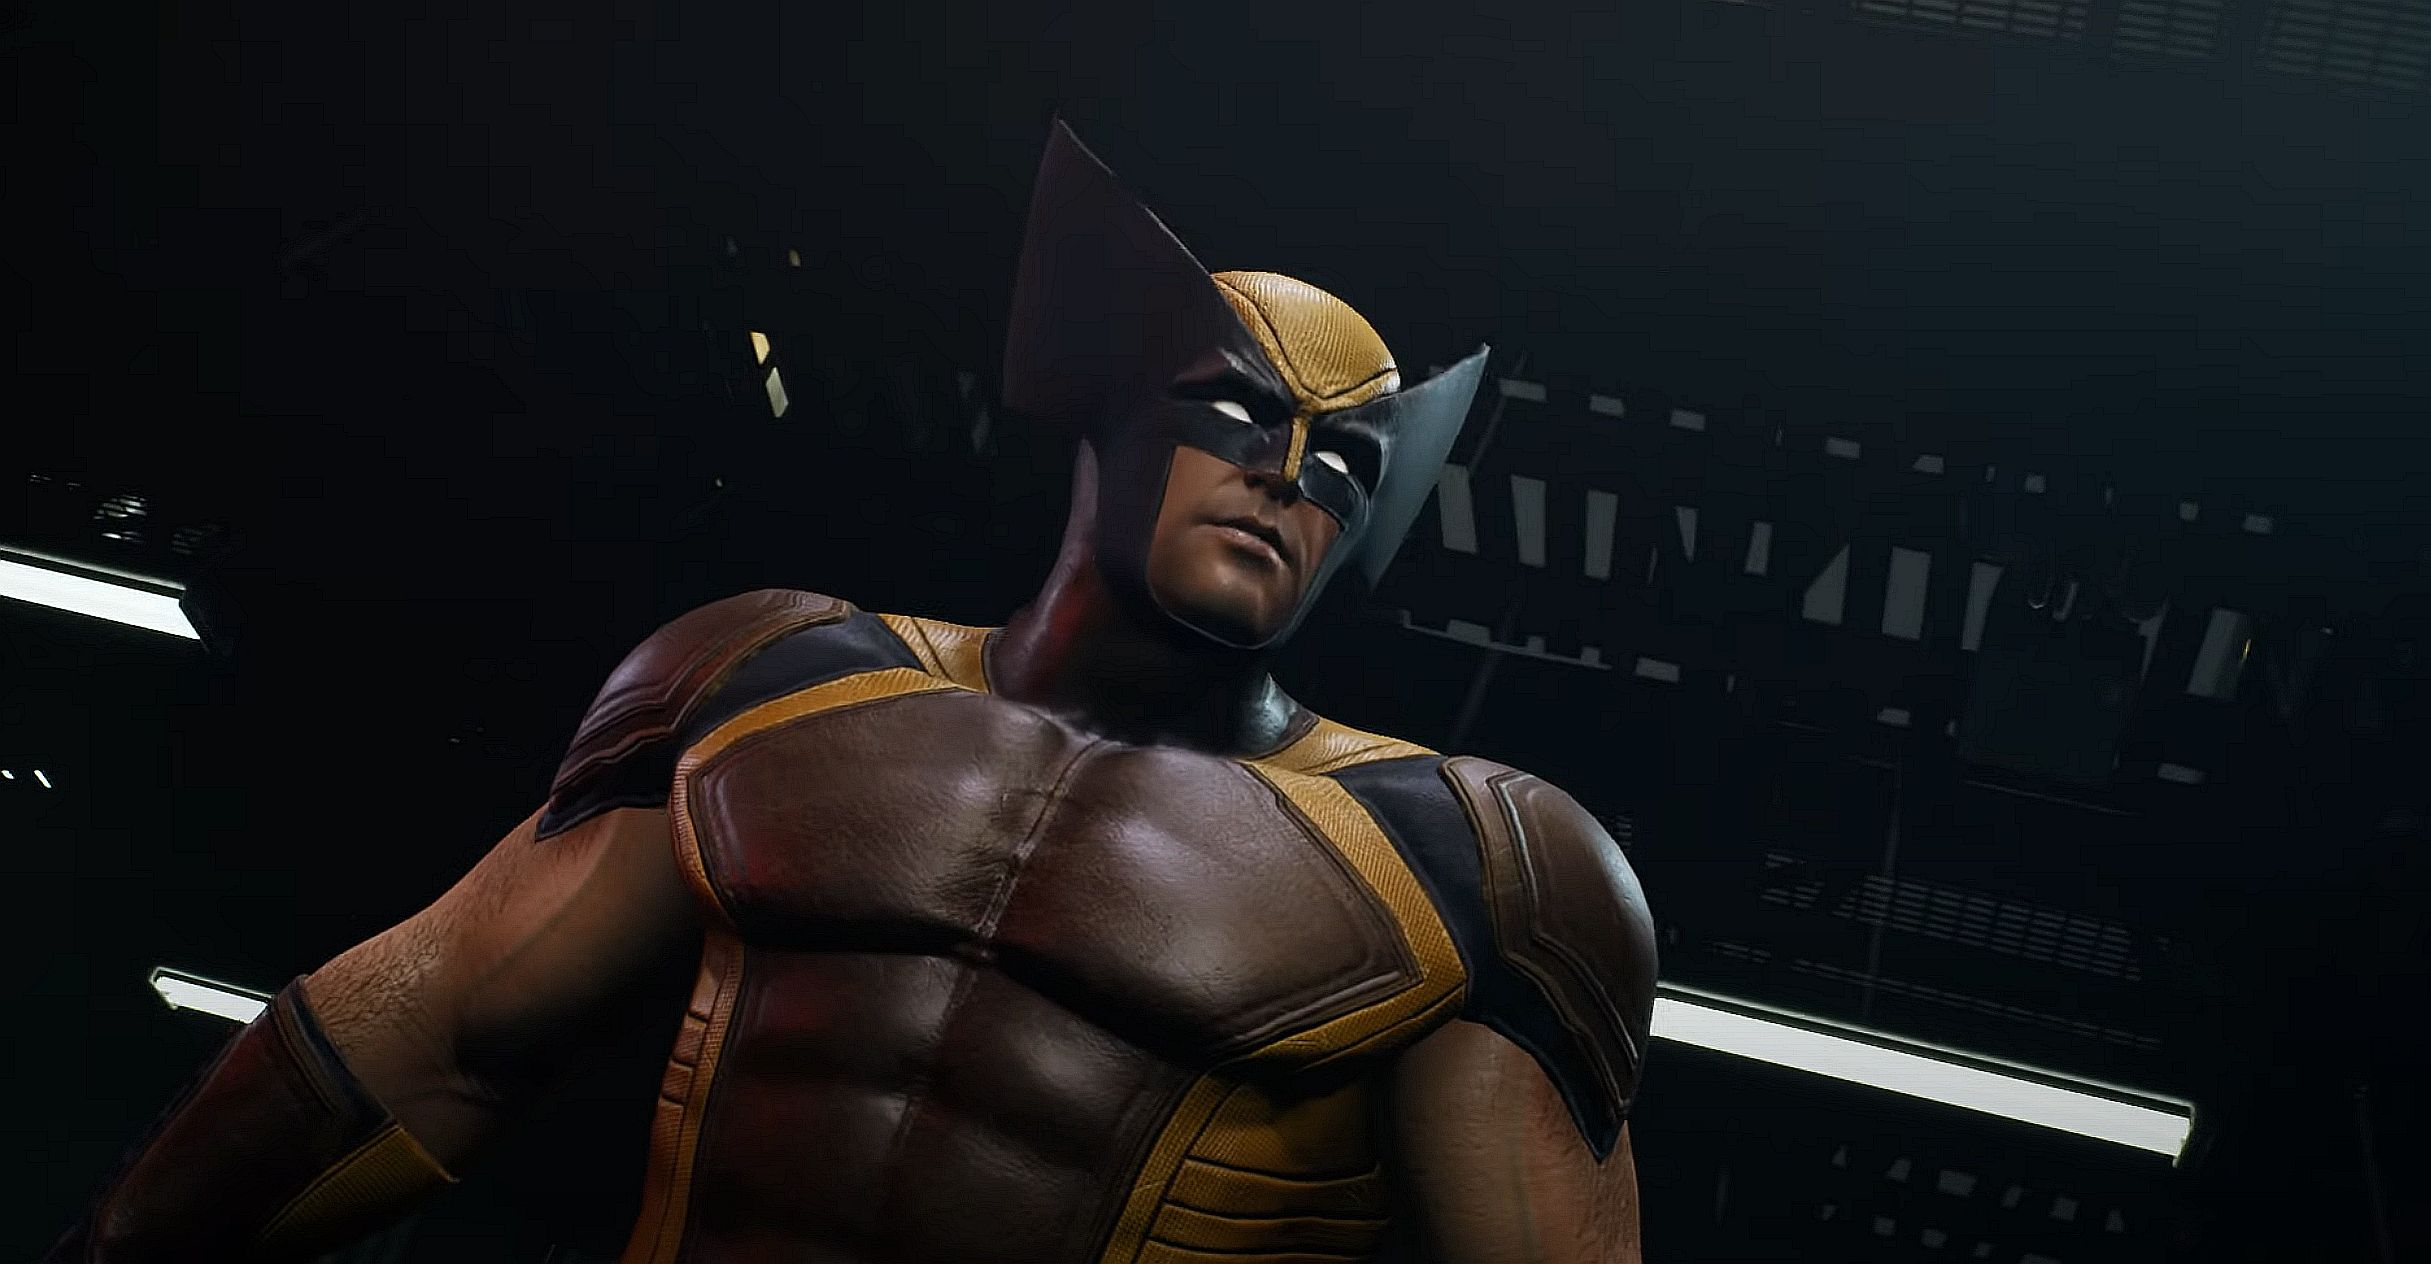 Image for Marvel's Midnight Suns first look at gameplay shows Wolverine and Sabretooth fighting it out